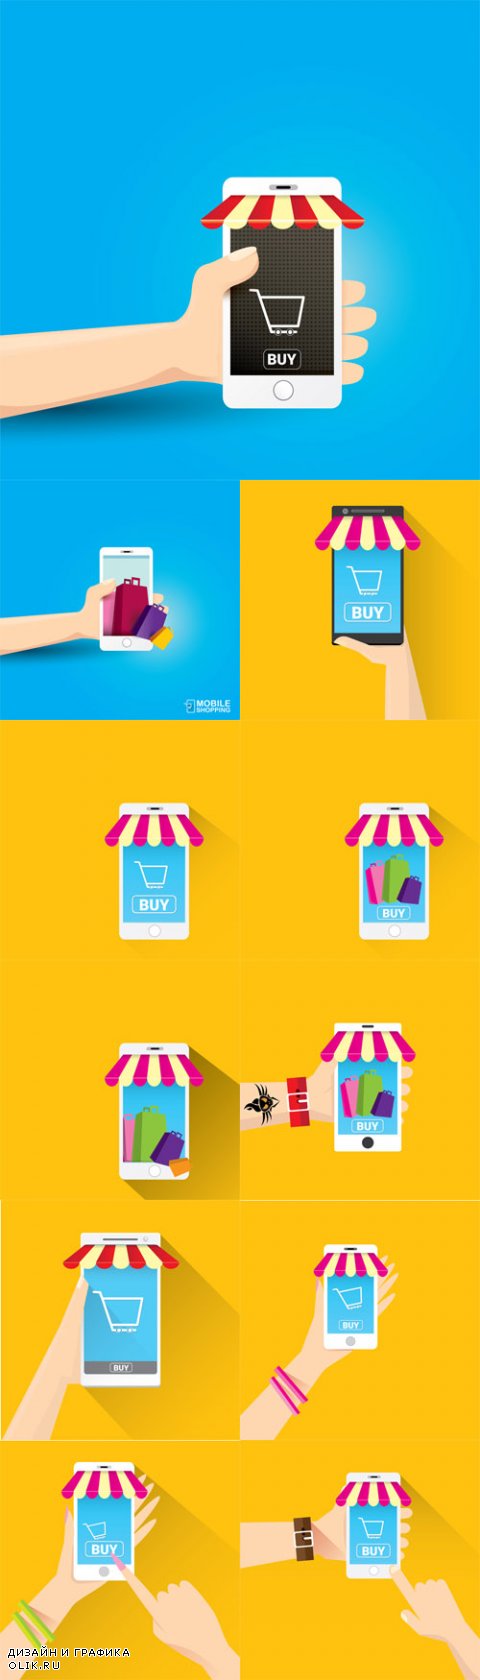 Vector Online Mobile Shopping Concept Backgrounds